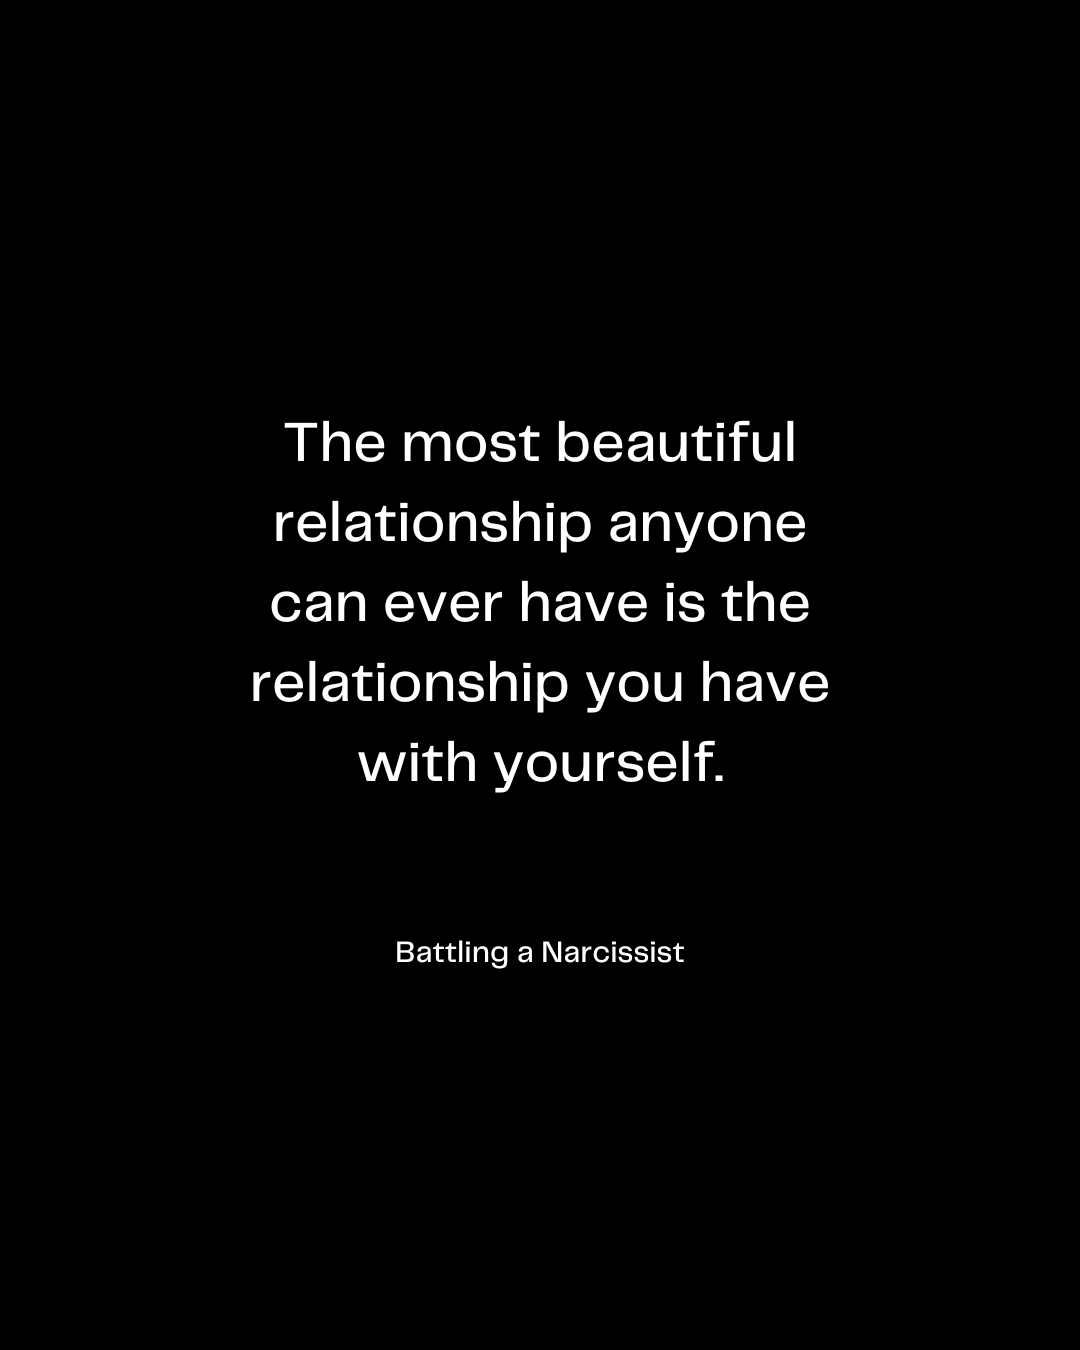 The most beautiful relationship anyone can ever have is the relationship you have with yourself.